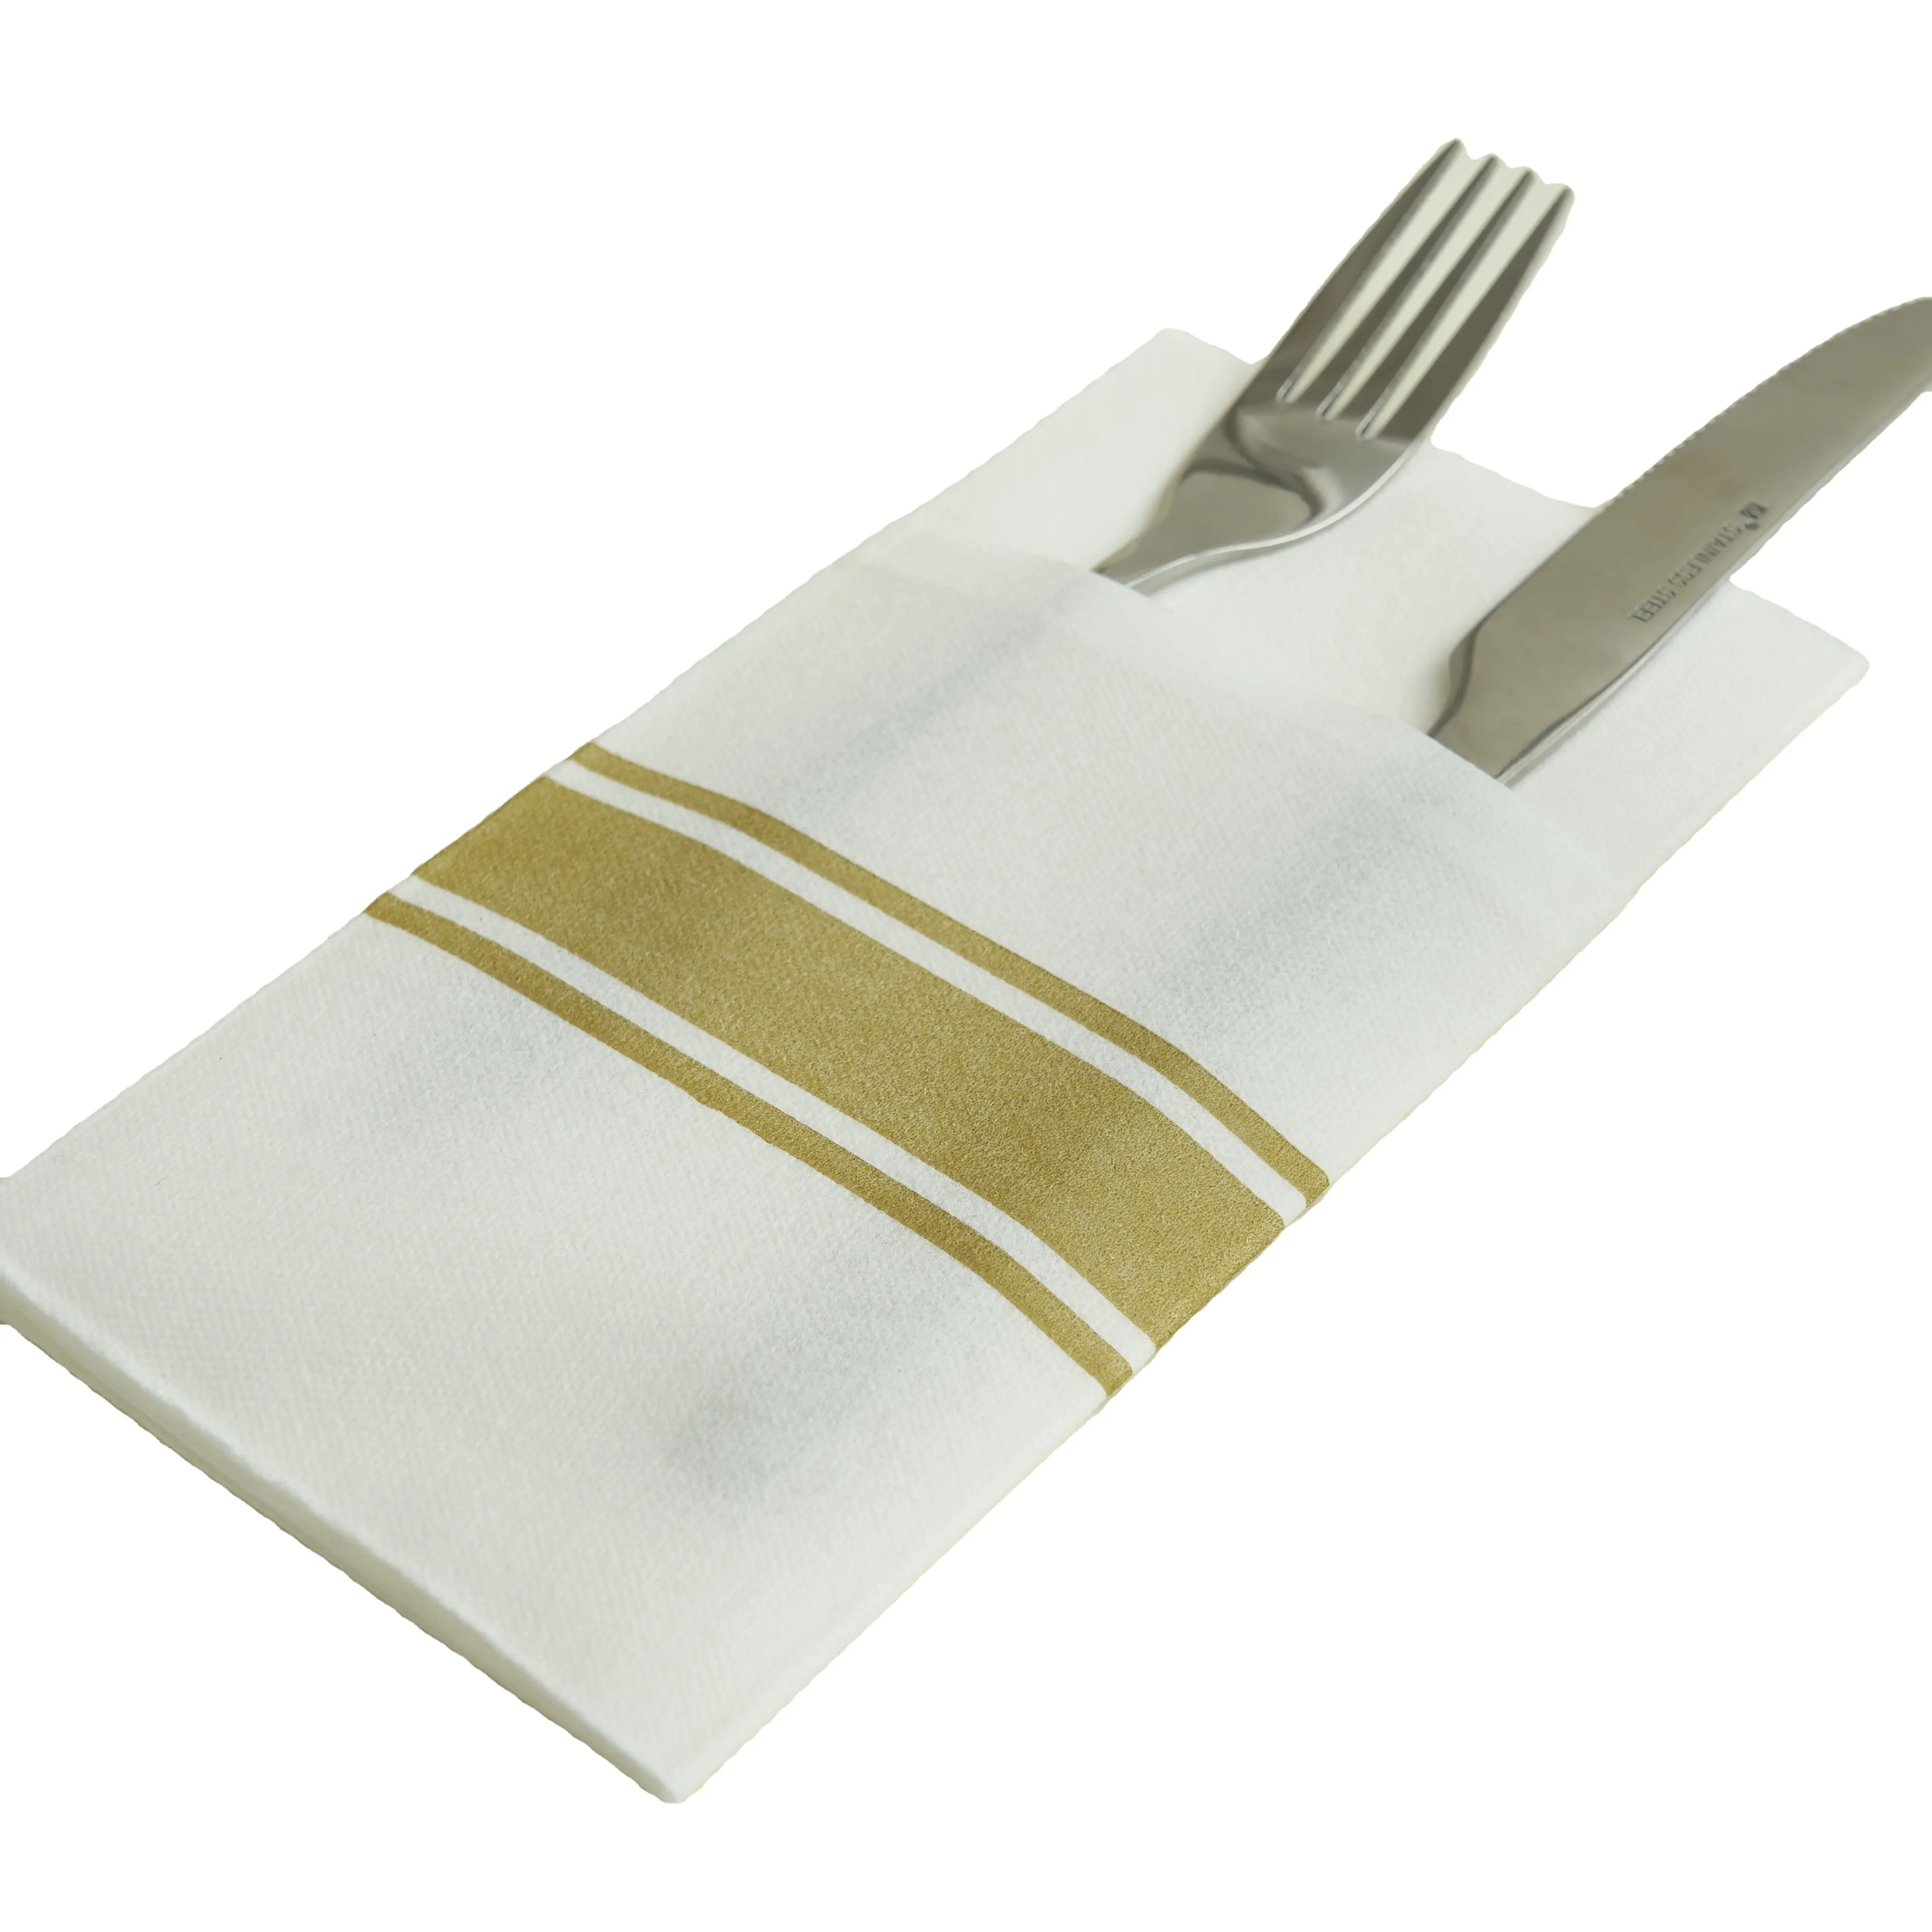 Decorative Cocktail Paper Napkin Christmas Paper Dinner Napkins With Golden Foiled